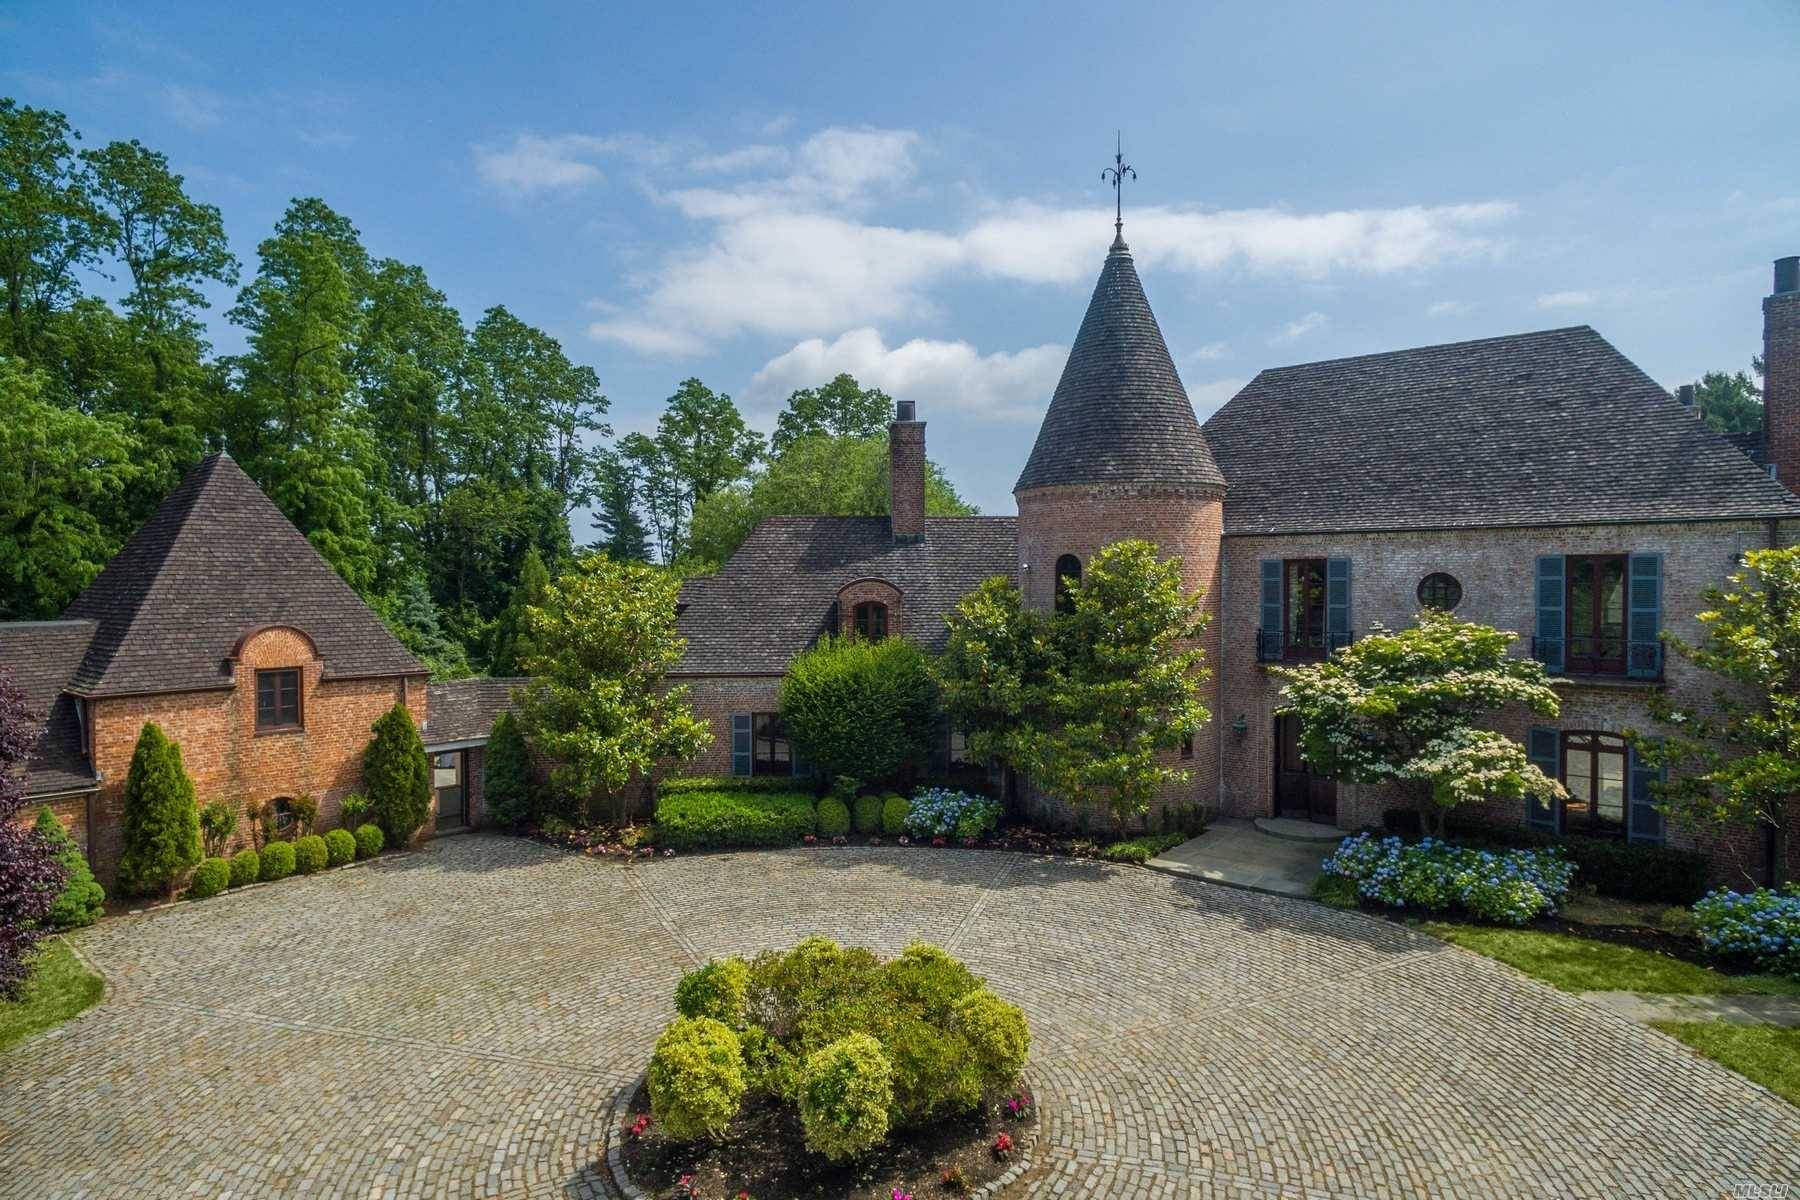 Live Like Royalty in this Majestic French Normandy Brick Manor, Formerly the Summer Retreat of the Duke amp ; Duchess of Windsor.